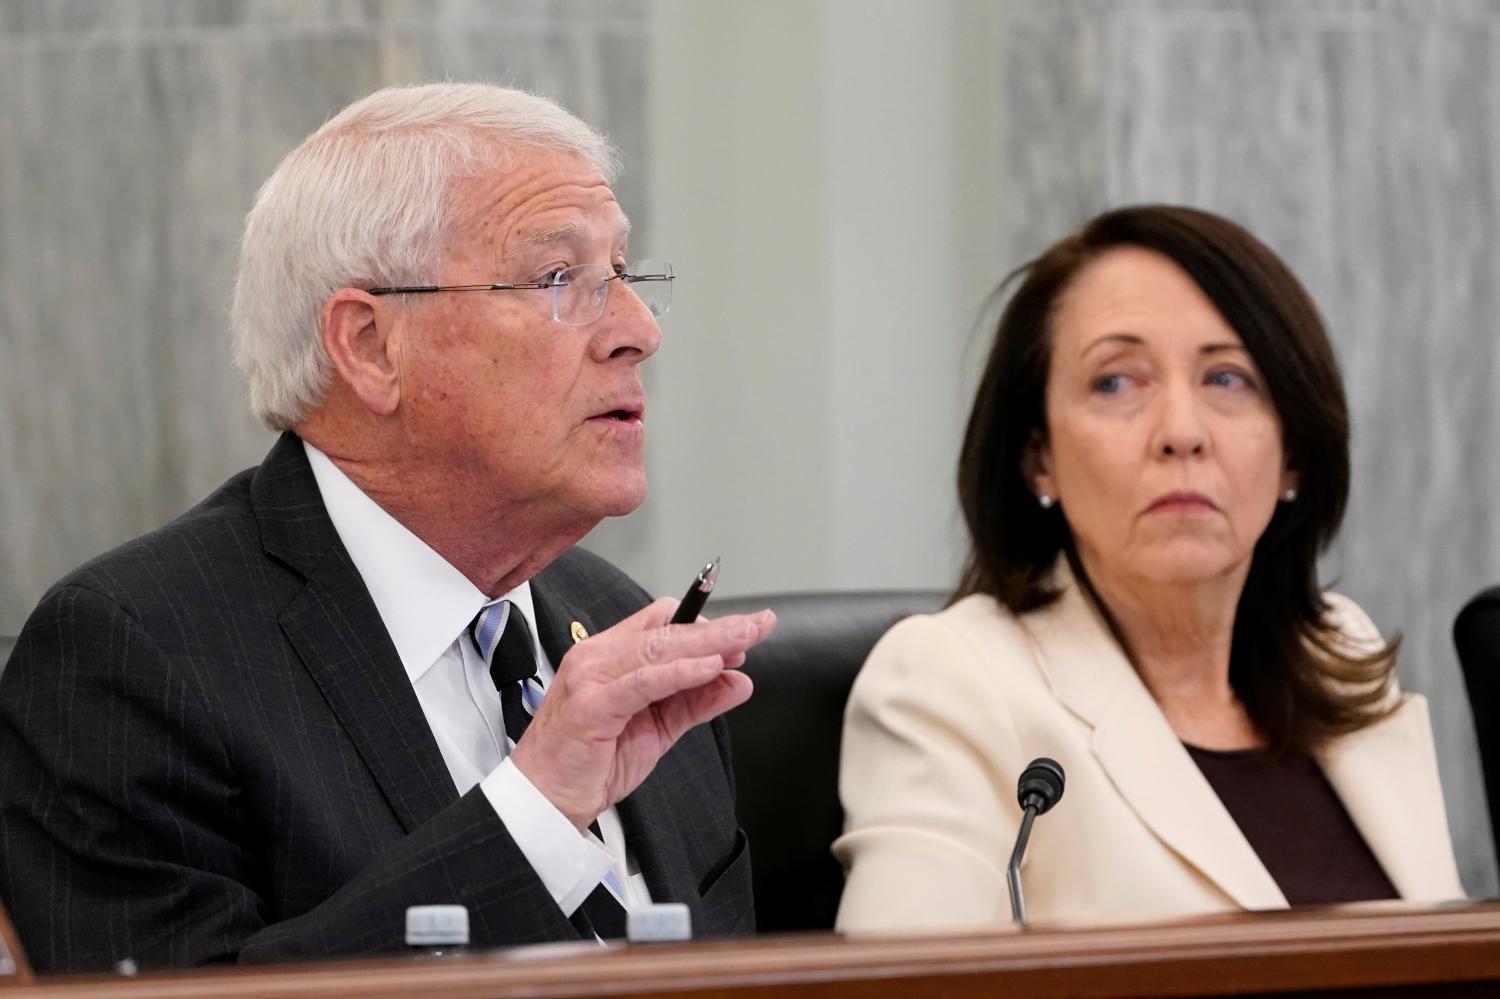 Senate Commerce, Science and Transportation Committee ranking member U.S. Senator Roger Wicker (R-MS) asks a question of Gigi Sohn, who is President Joe Biden's nominee to serve on the Federal Communications Commission, during her confirmation hearing before the Senate Commerce, Science and Transportation Committee, next to Senator Maria Cantwell (D-WA)